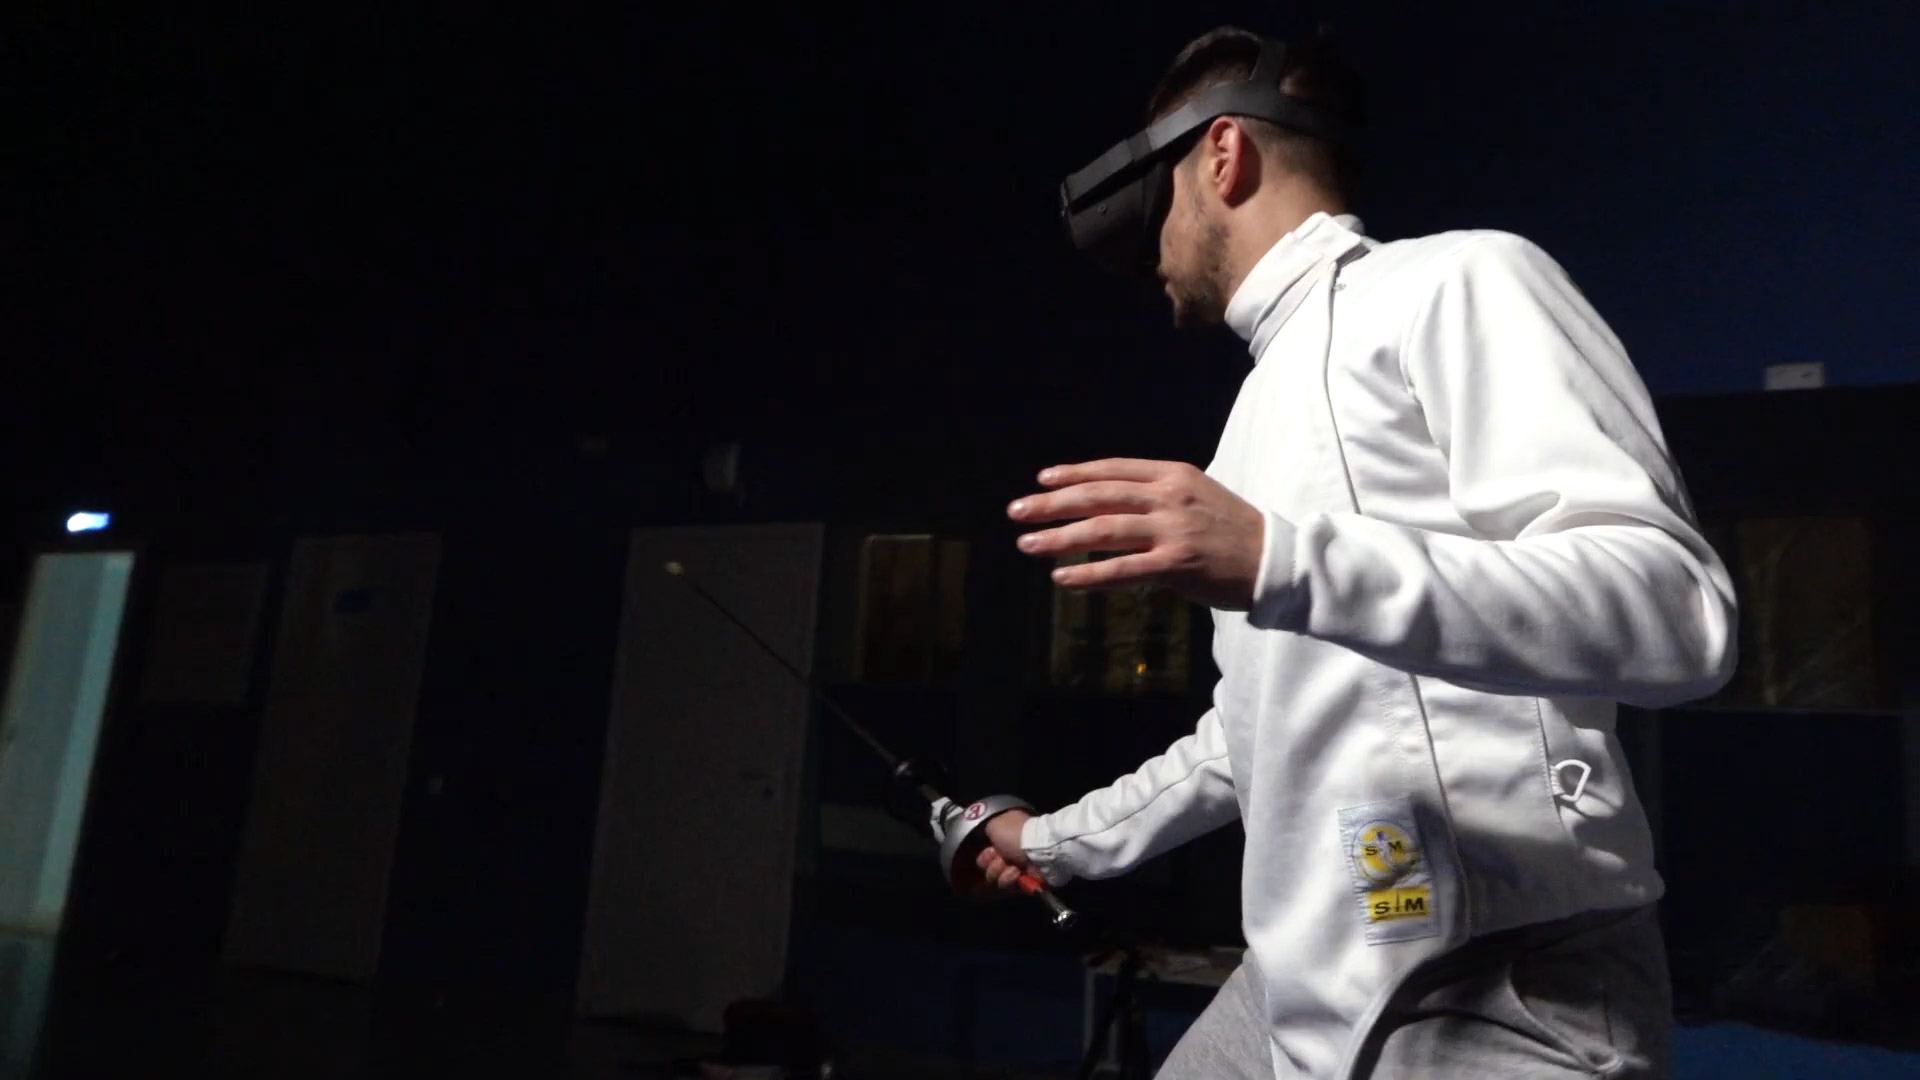 sports industry trends 2021- player with white jersey and vr headset in eyes